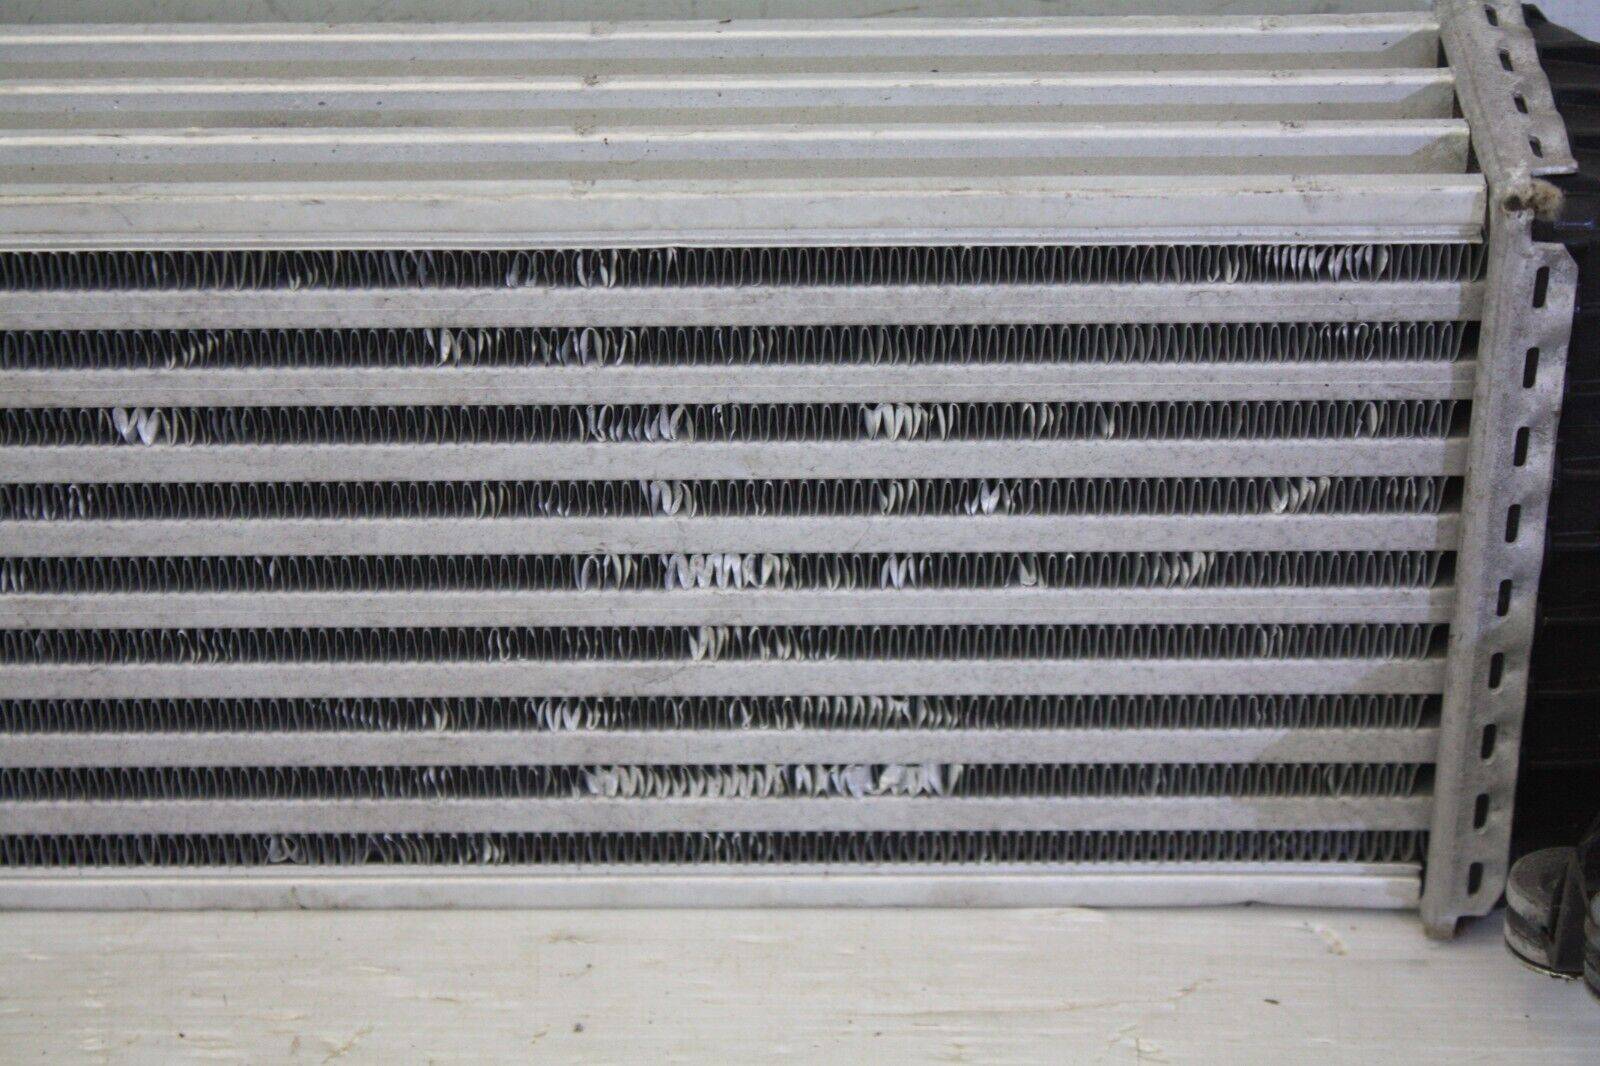 Ford-Transit-Connect-Cooling-Radiator-7T16-9L440-AD-Genuine-176105939792-9